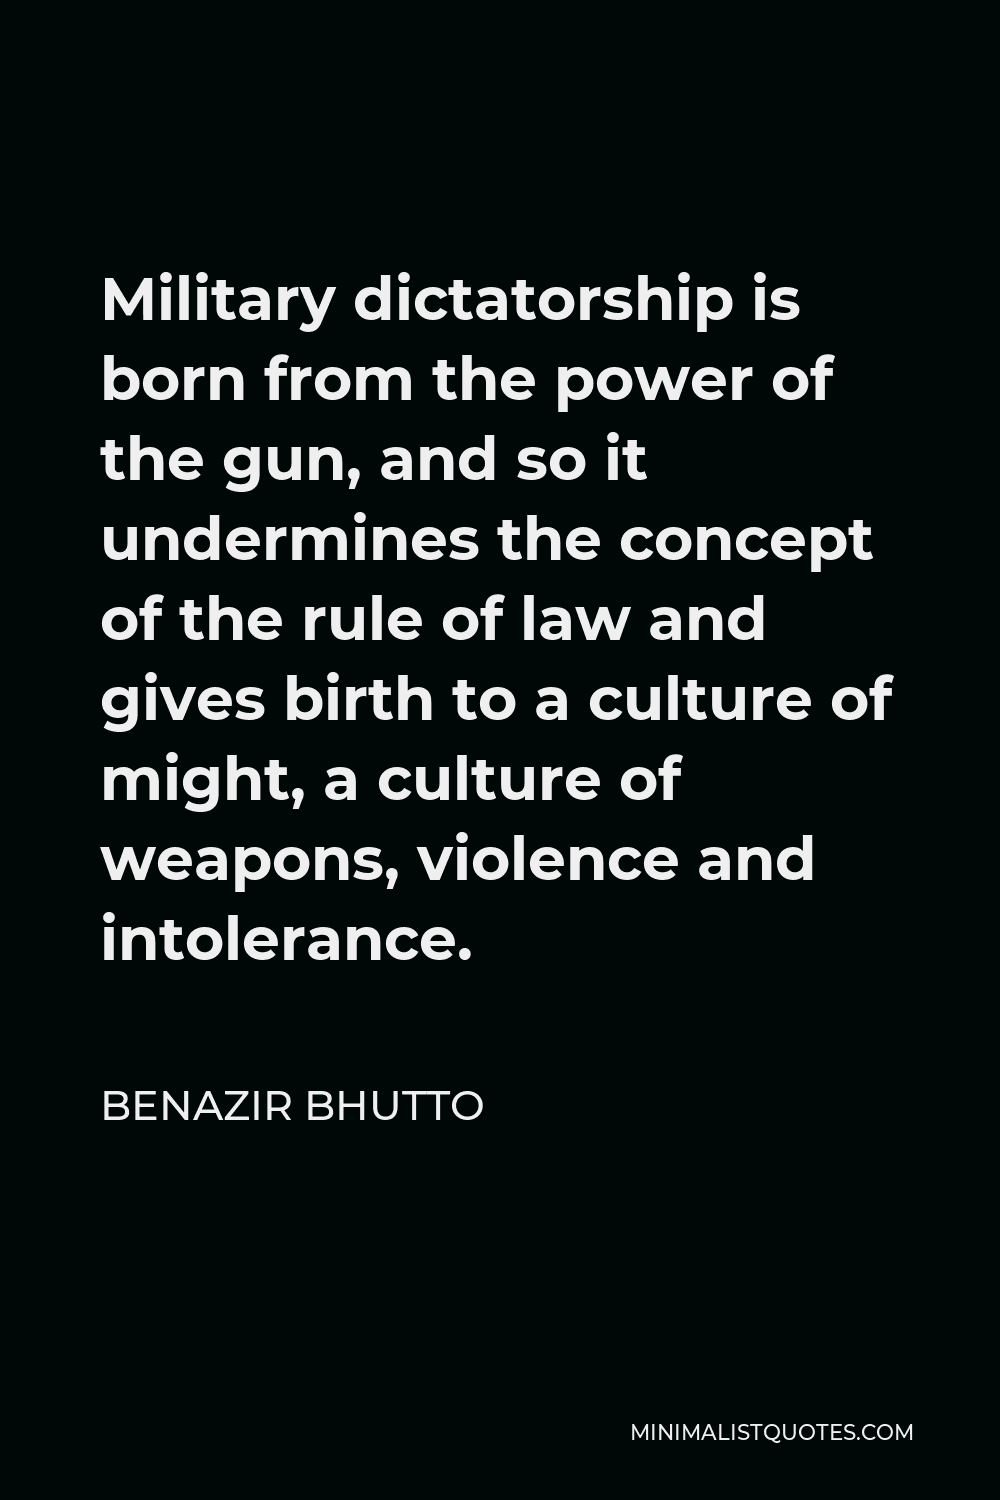 Benazir Bhutto Quote - Military dictatorship is born from the power of the gun, and so it undermines the concept of the rule of law and gives birth to a culture of might, a culture of weapons, violence and intolerance.